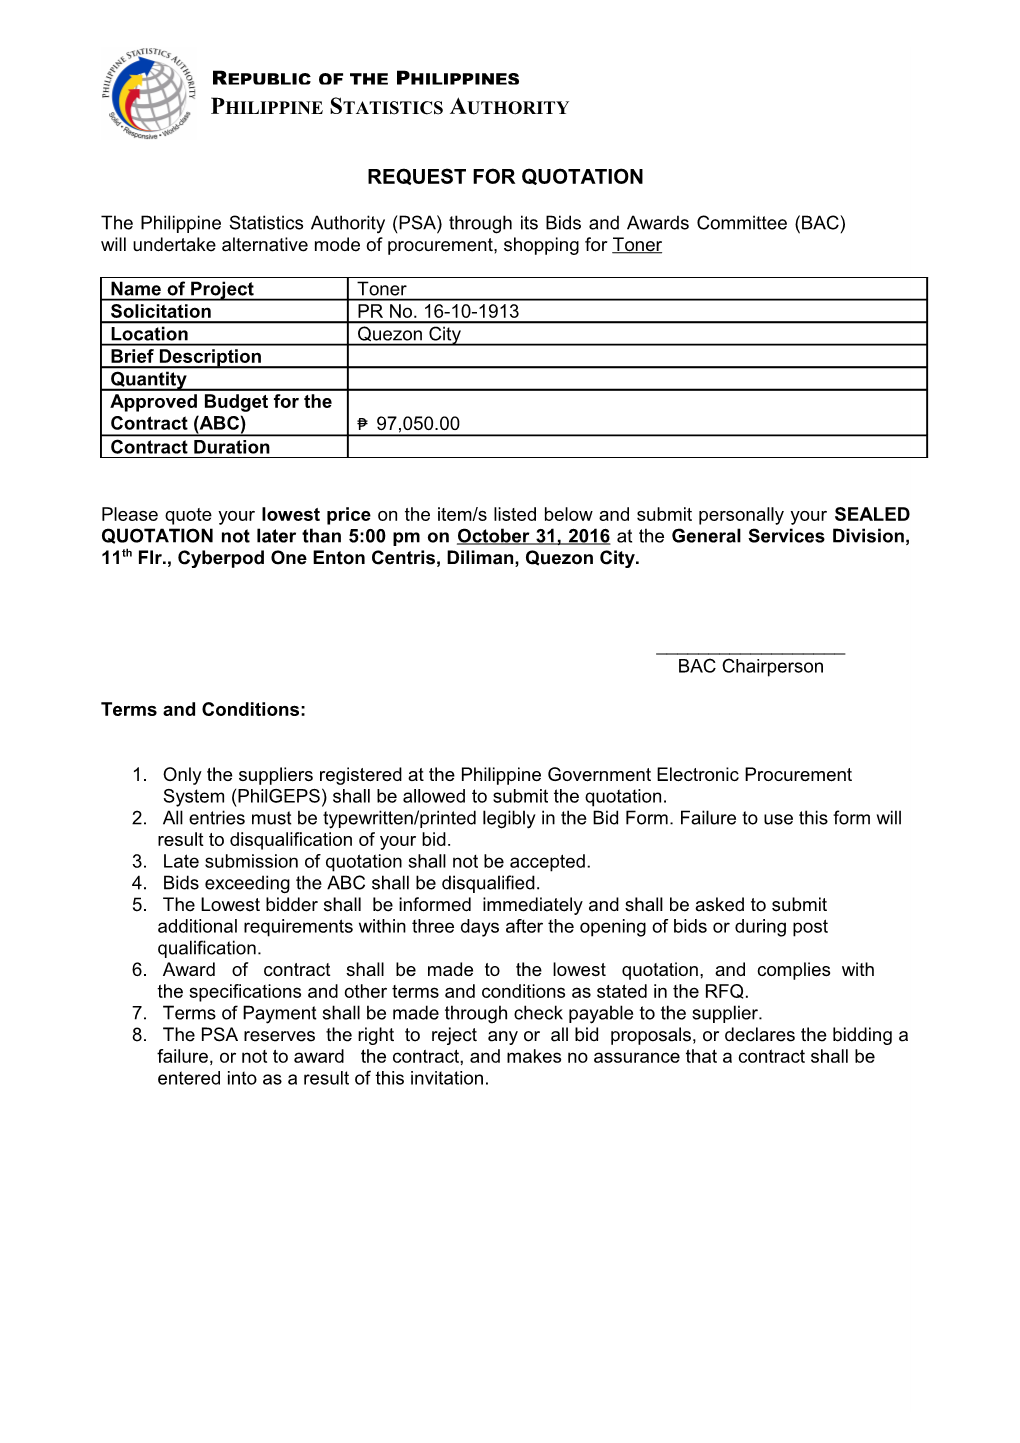 Request for Quotation s16